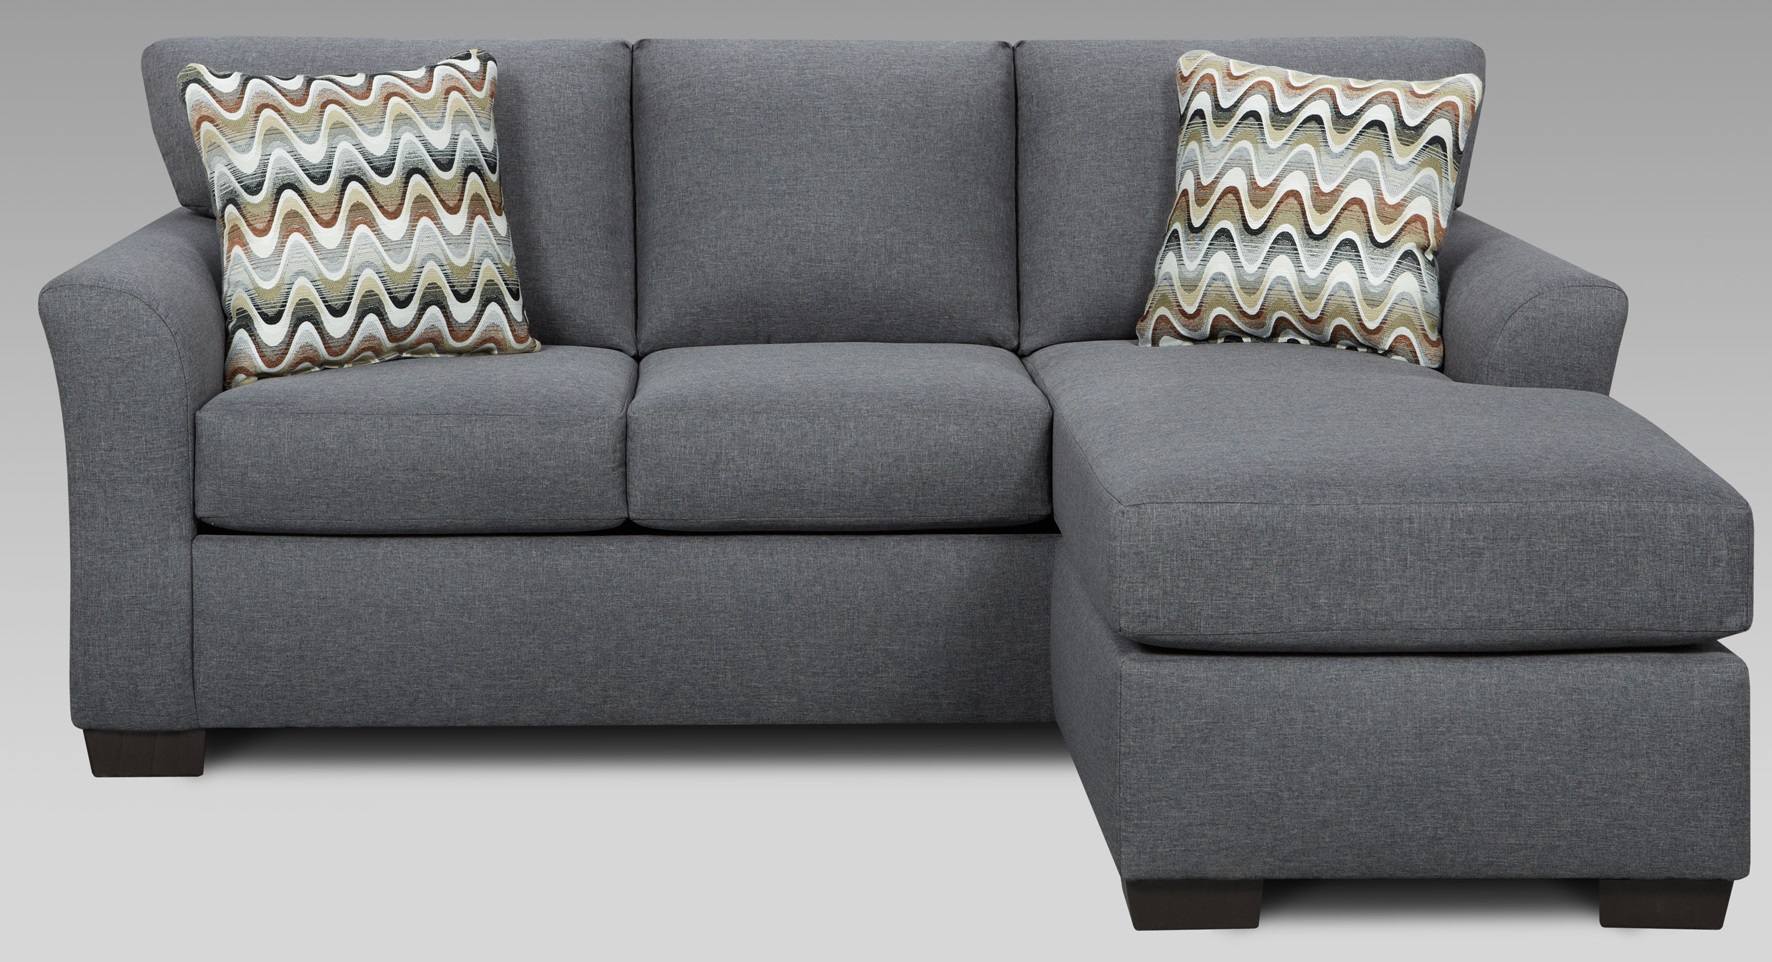 front view of a grey l-shaped sleeper sofa with two pillows